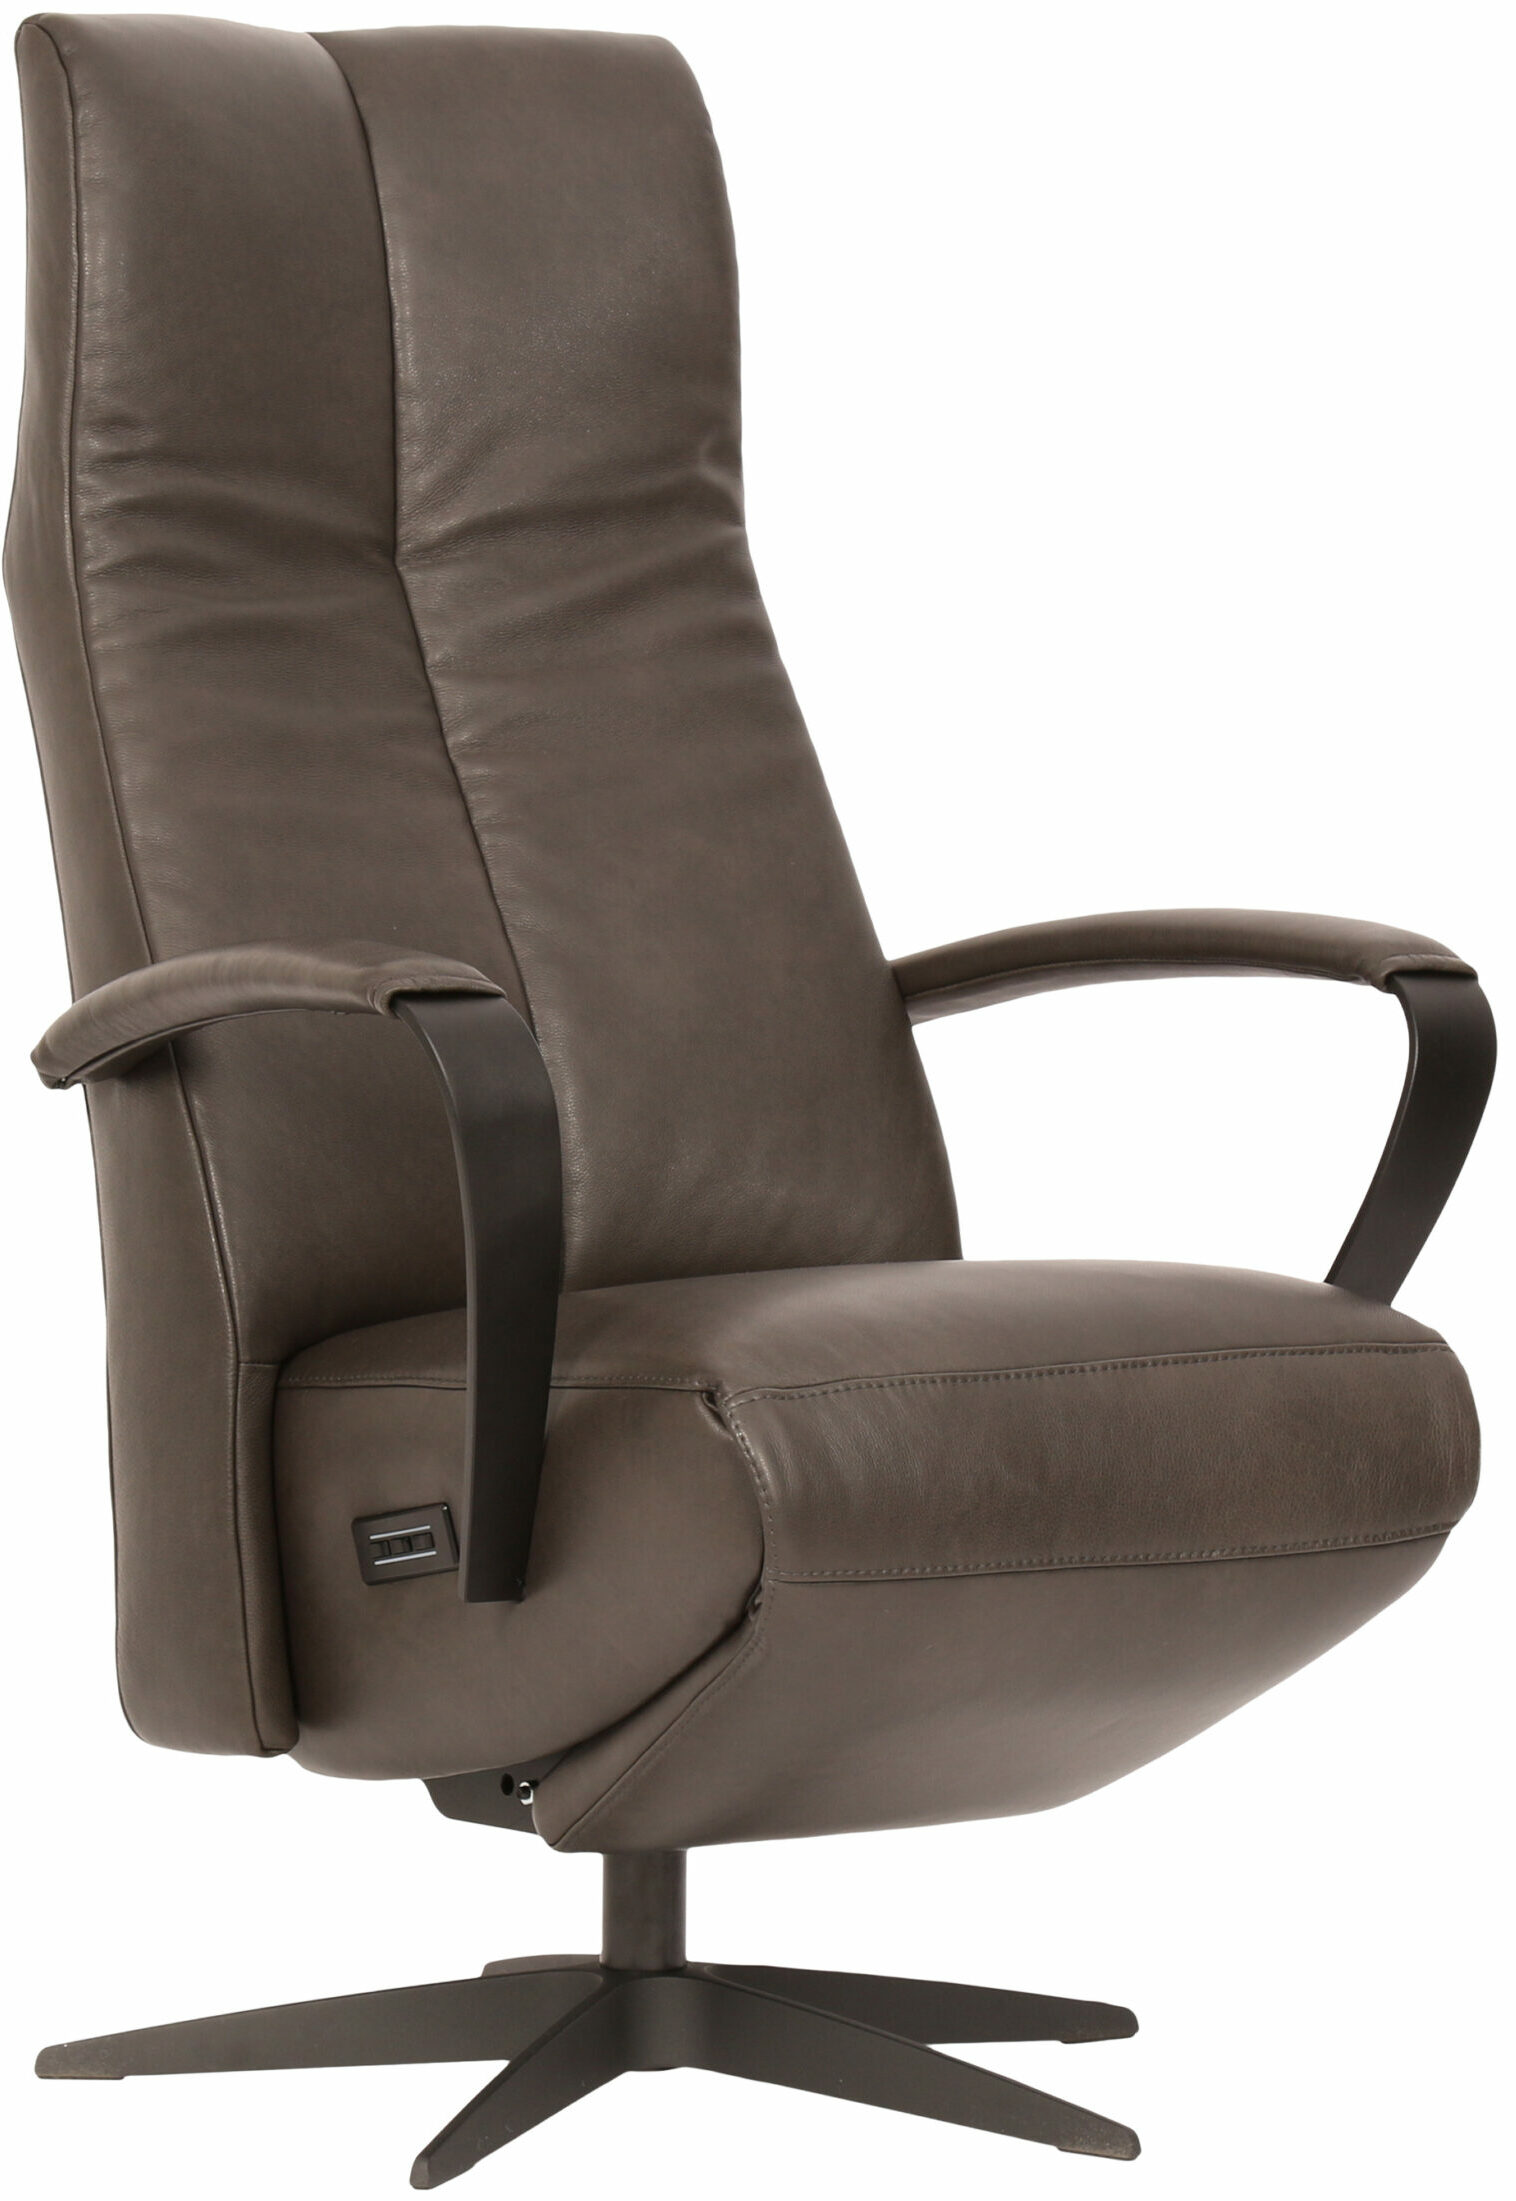 Twinz 226 relaxfauteuil